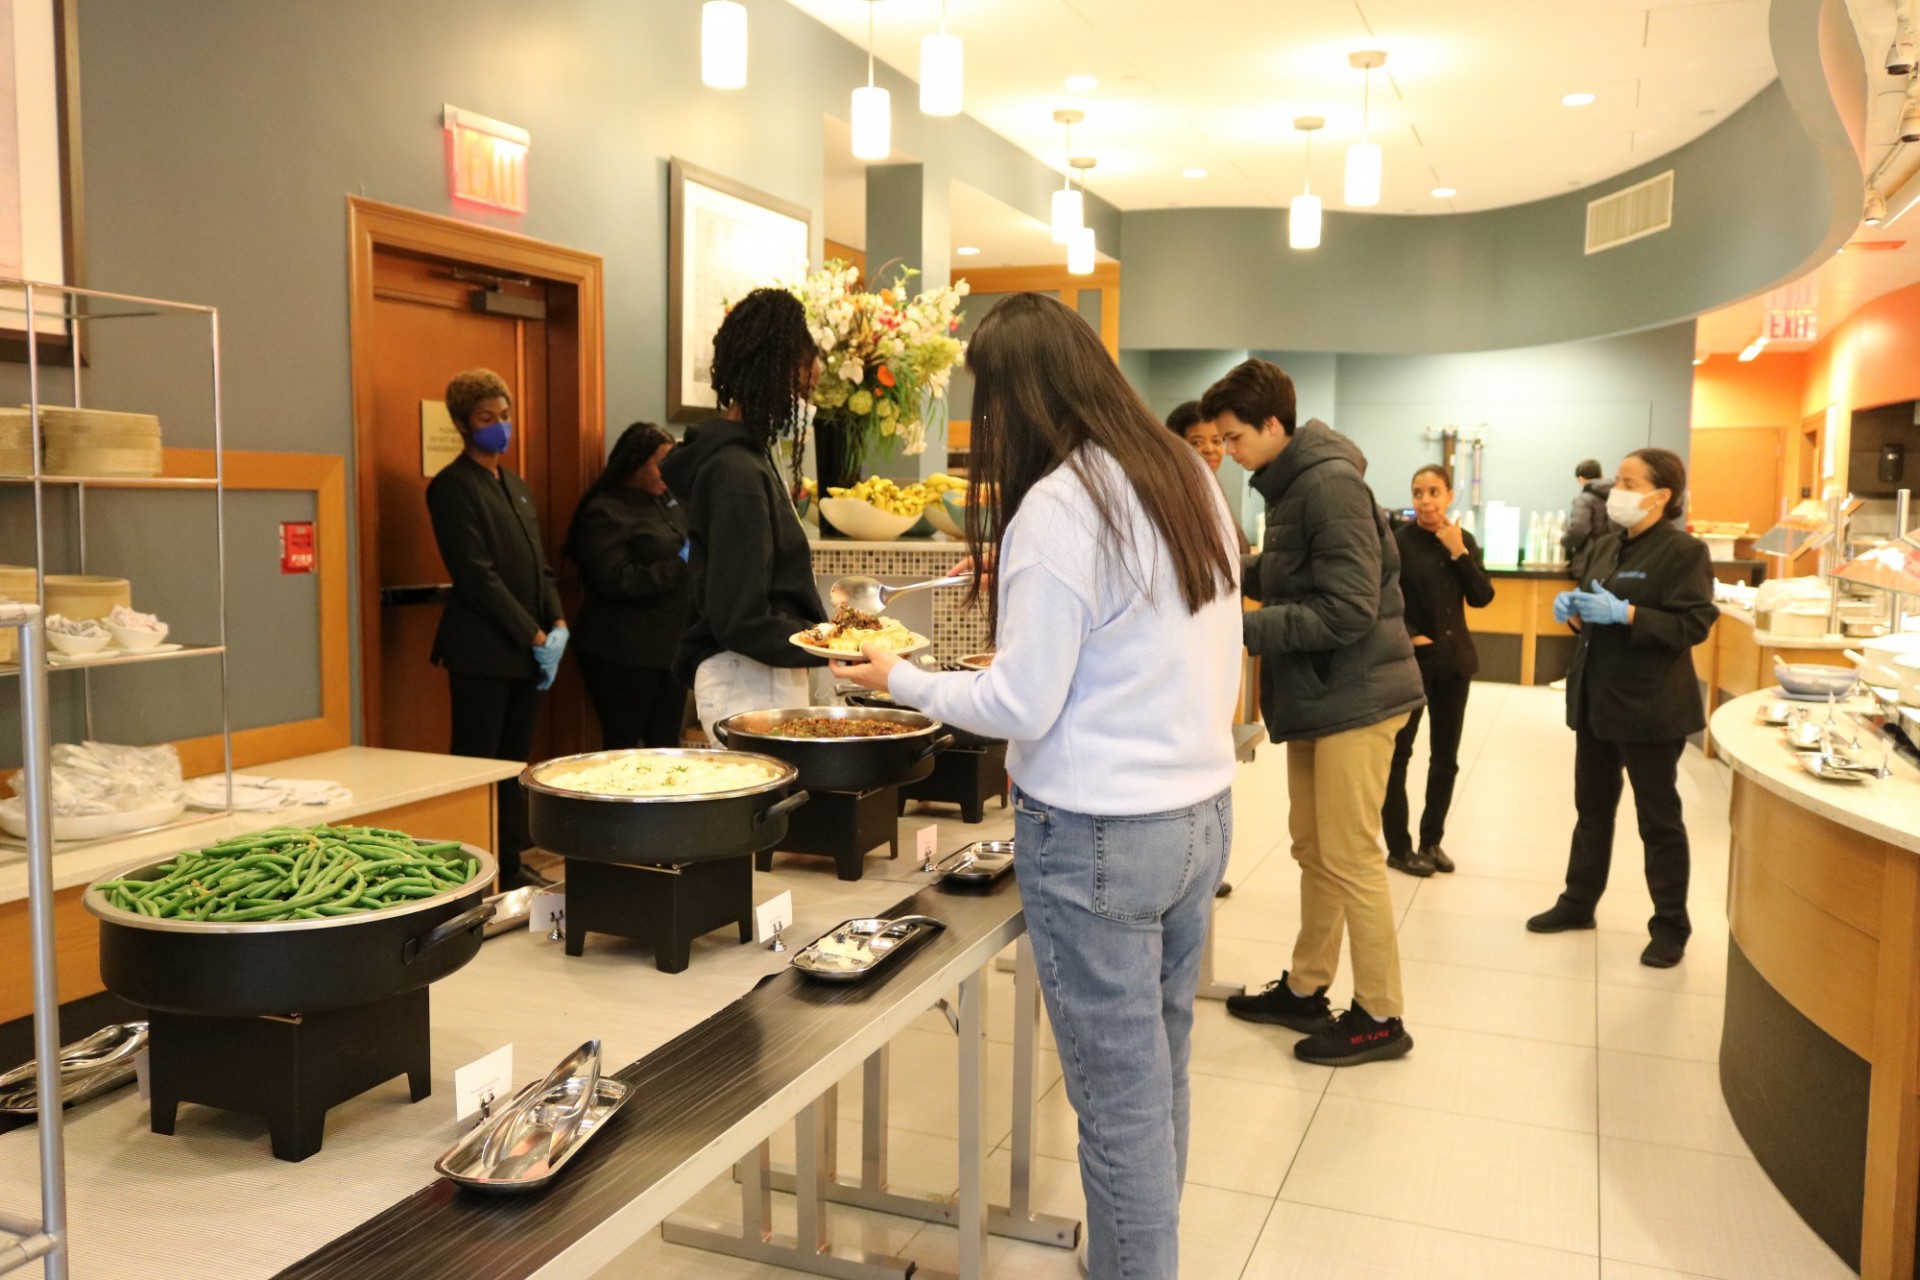 Students in the servery